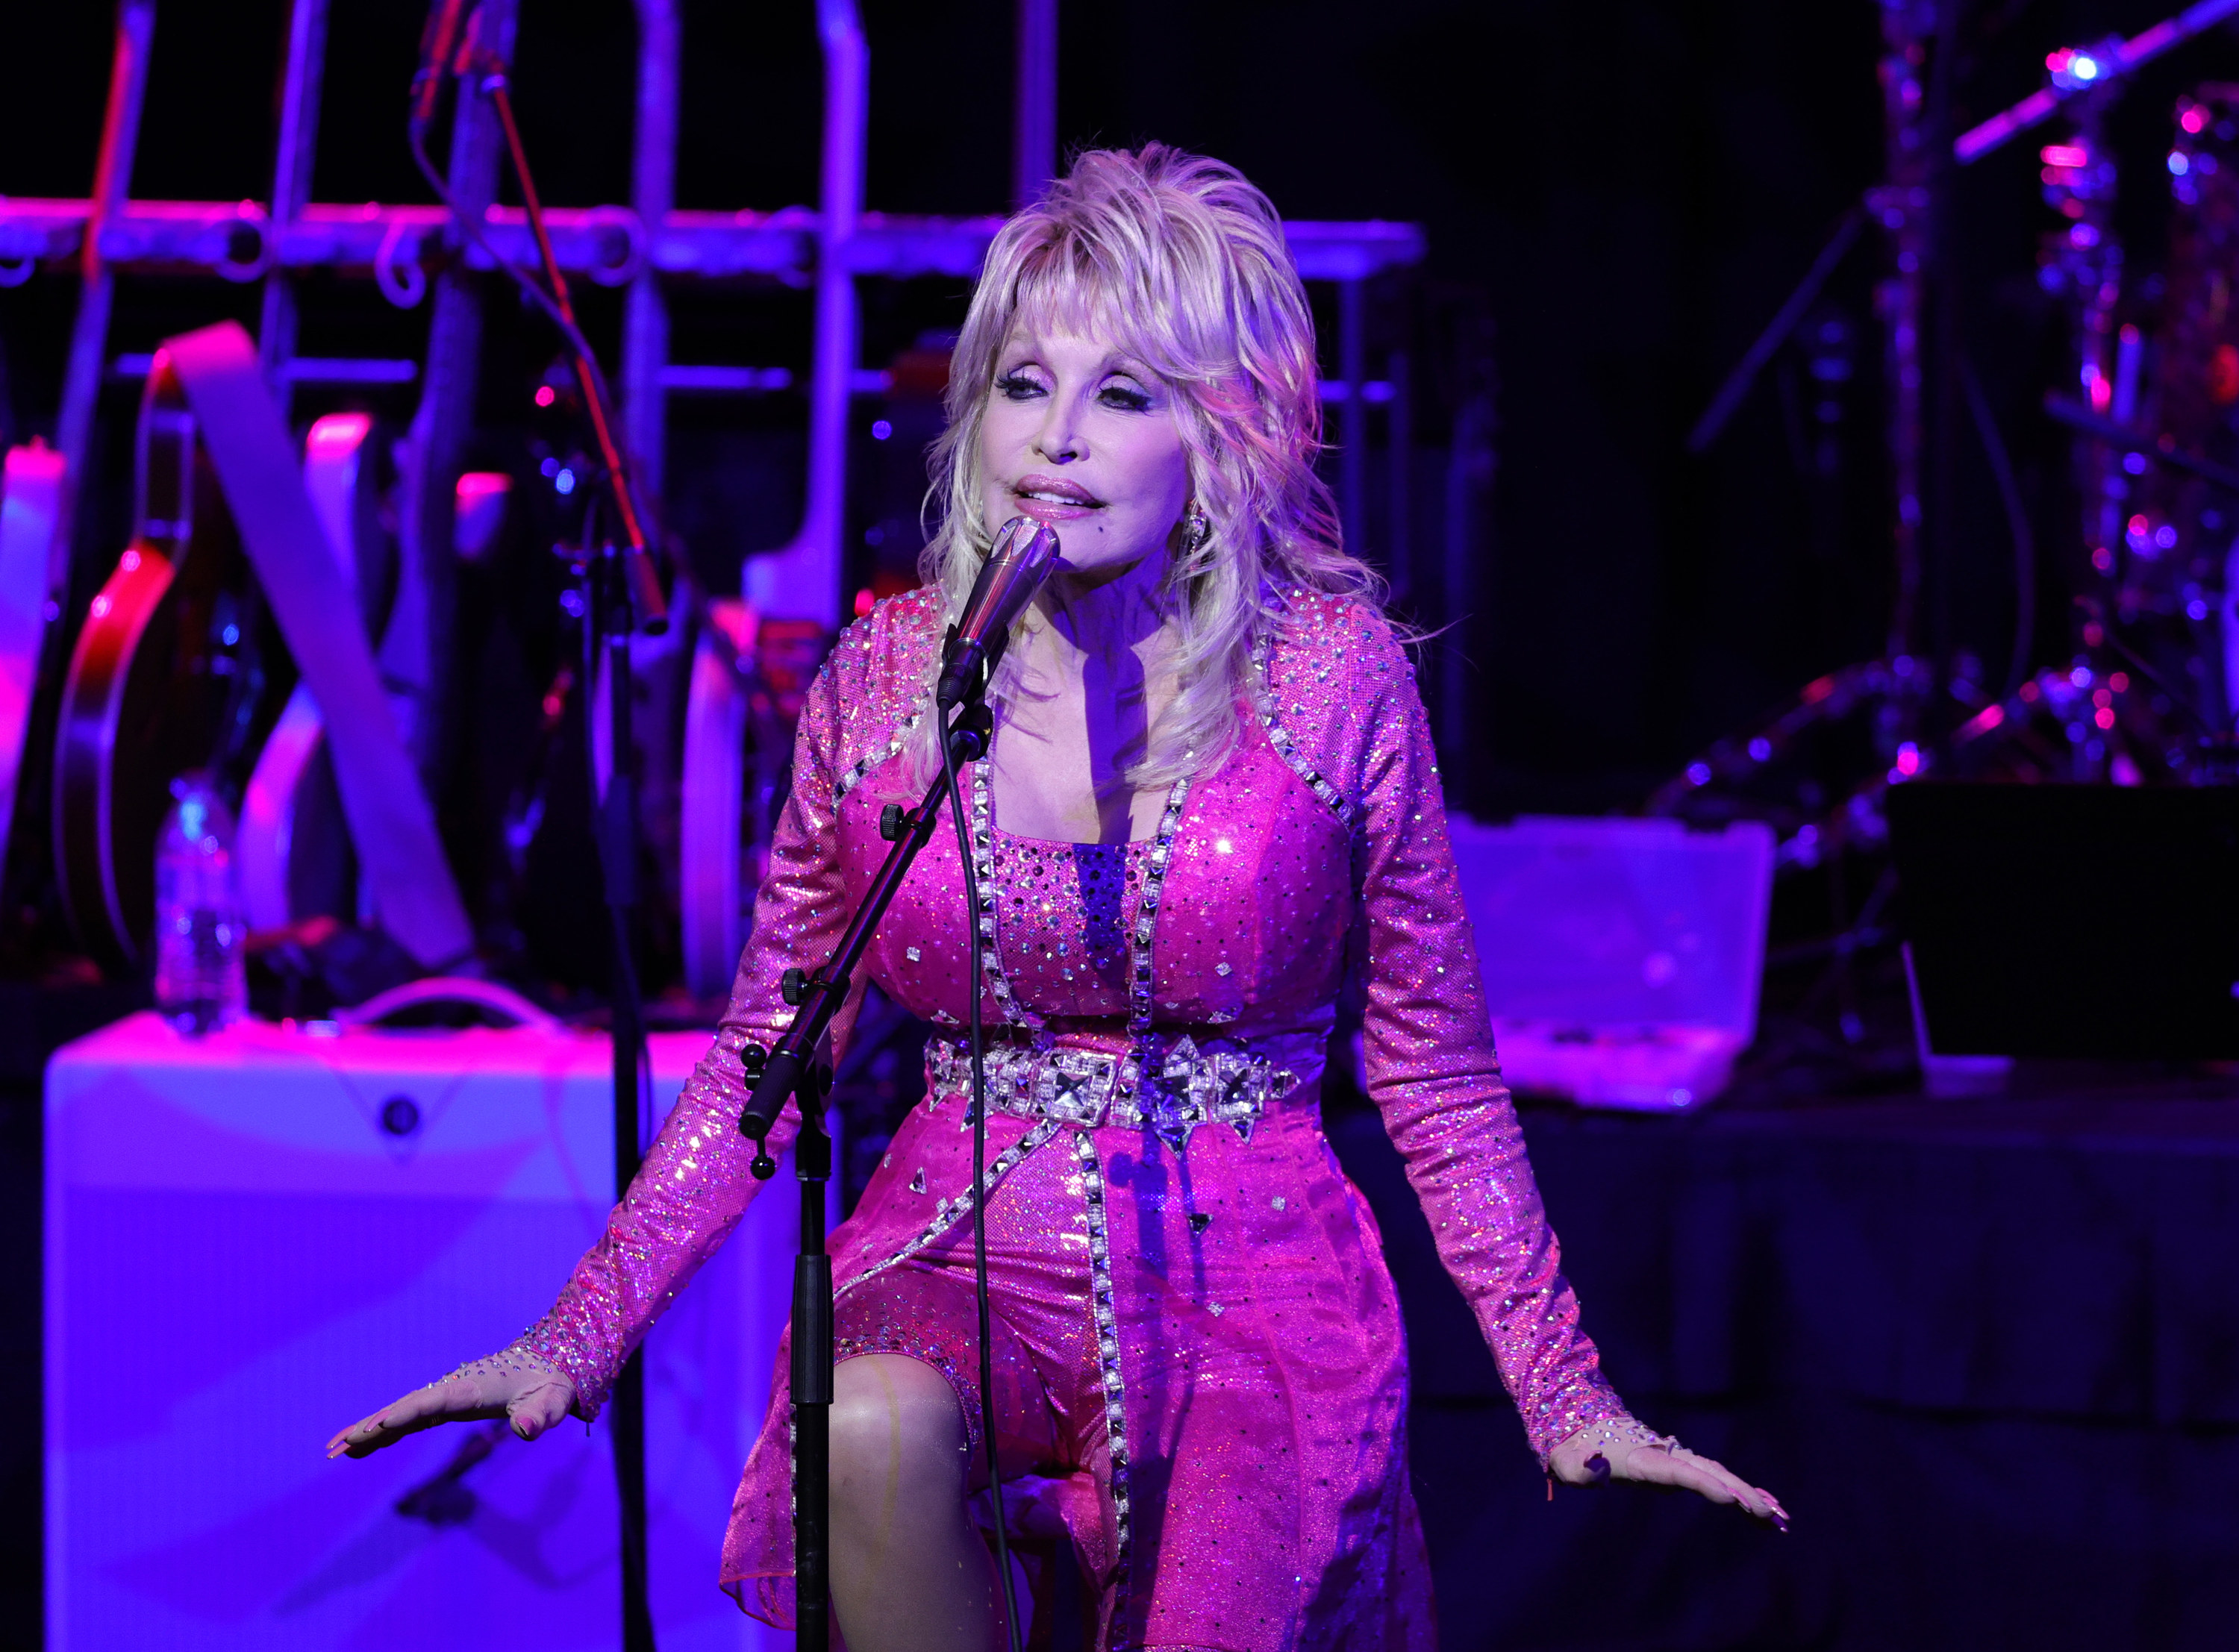 Dolly performing in a pink outfit at a benefit